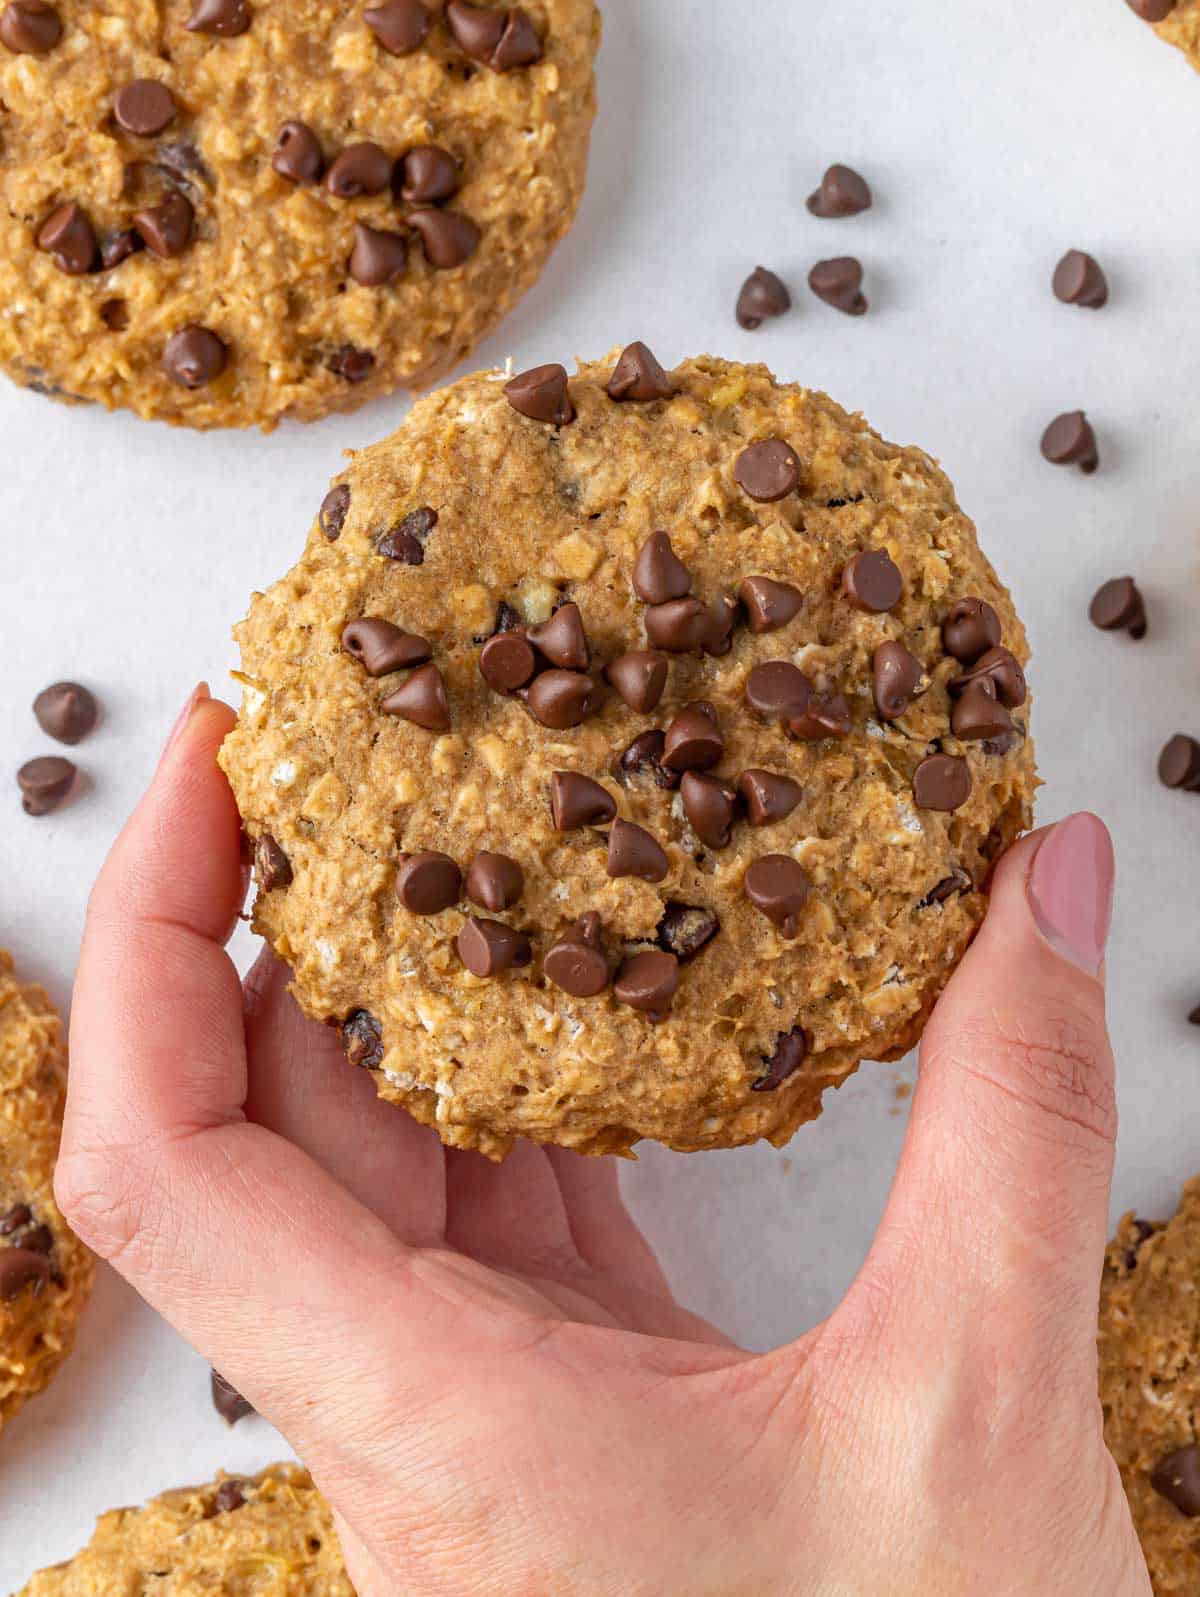 Hand holding one healthy chocolate chip oatmeal cookie.